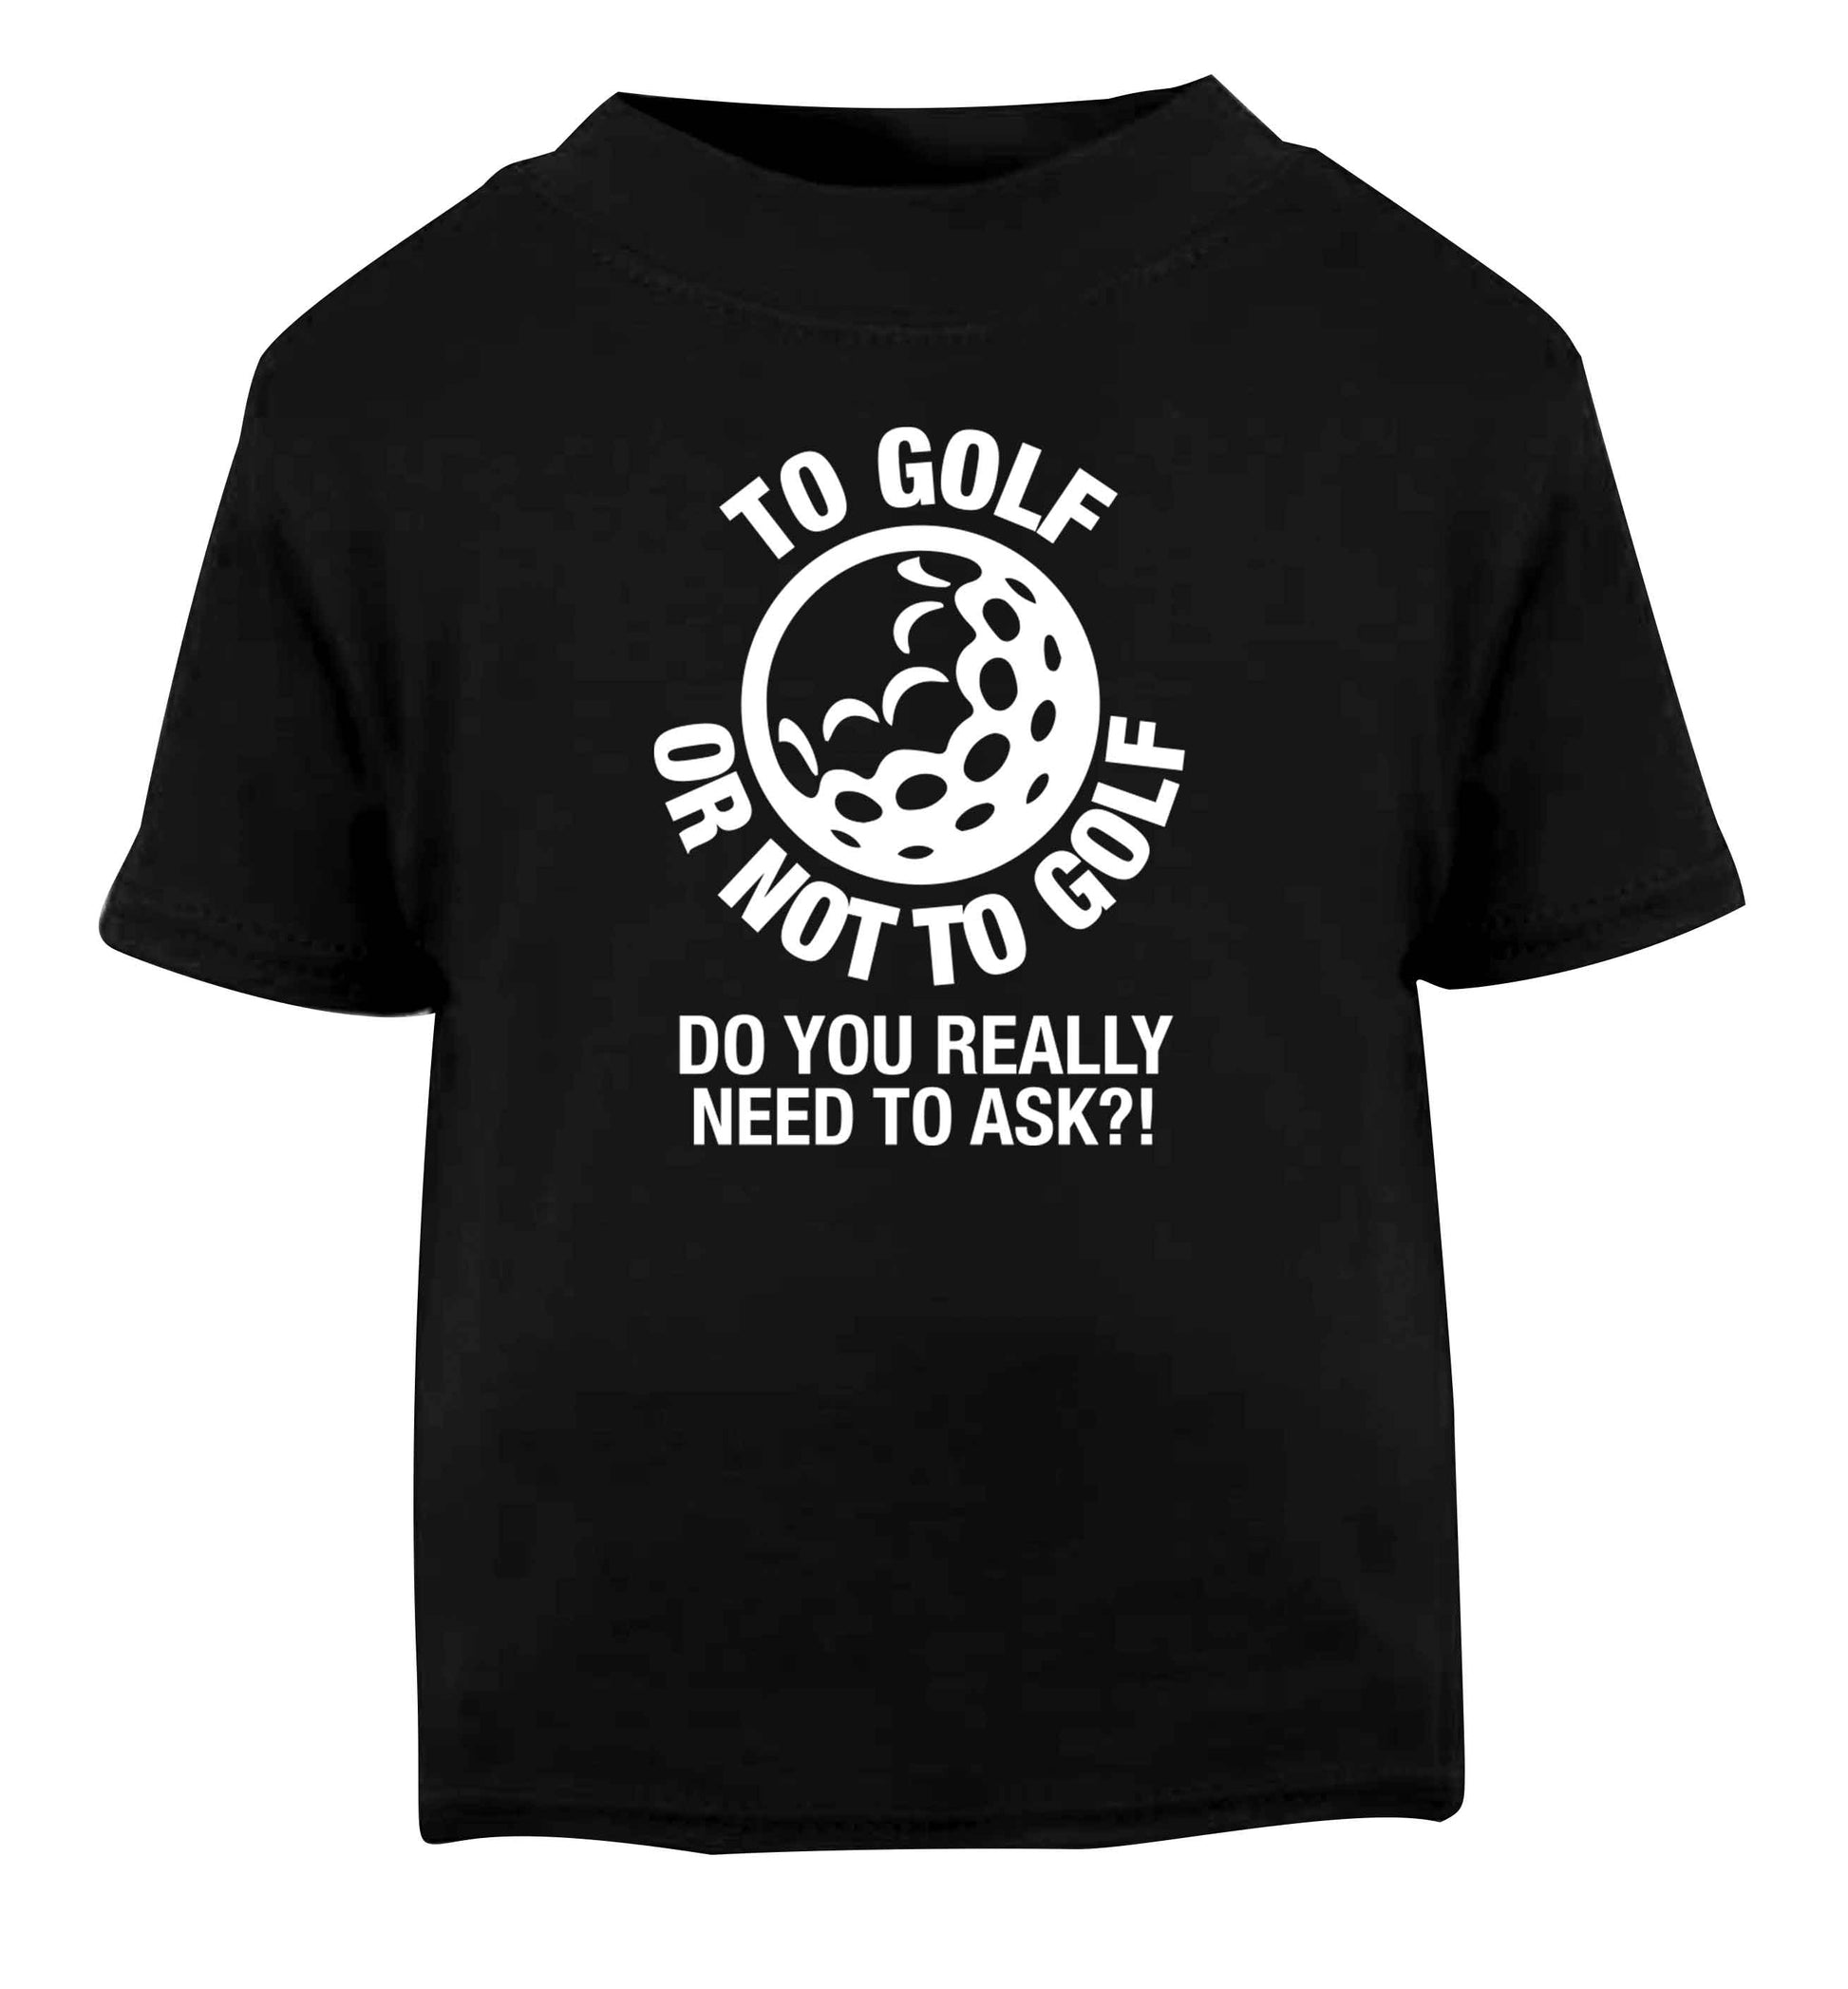 To golf or not to golf Do you really need to ask?! Black Baby Toddler Tshirt 2 years